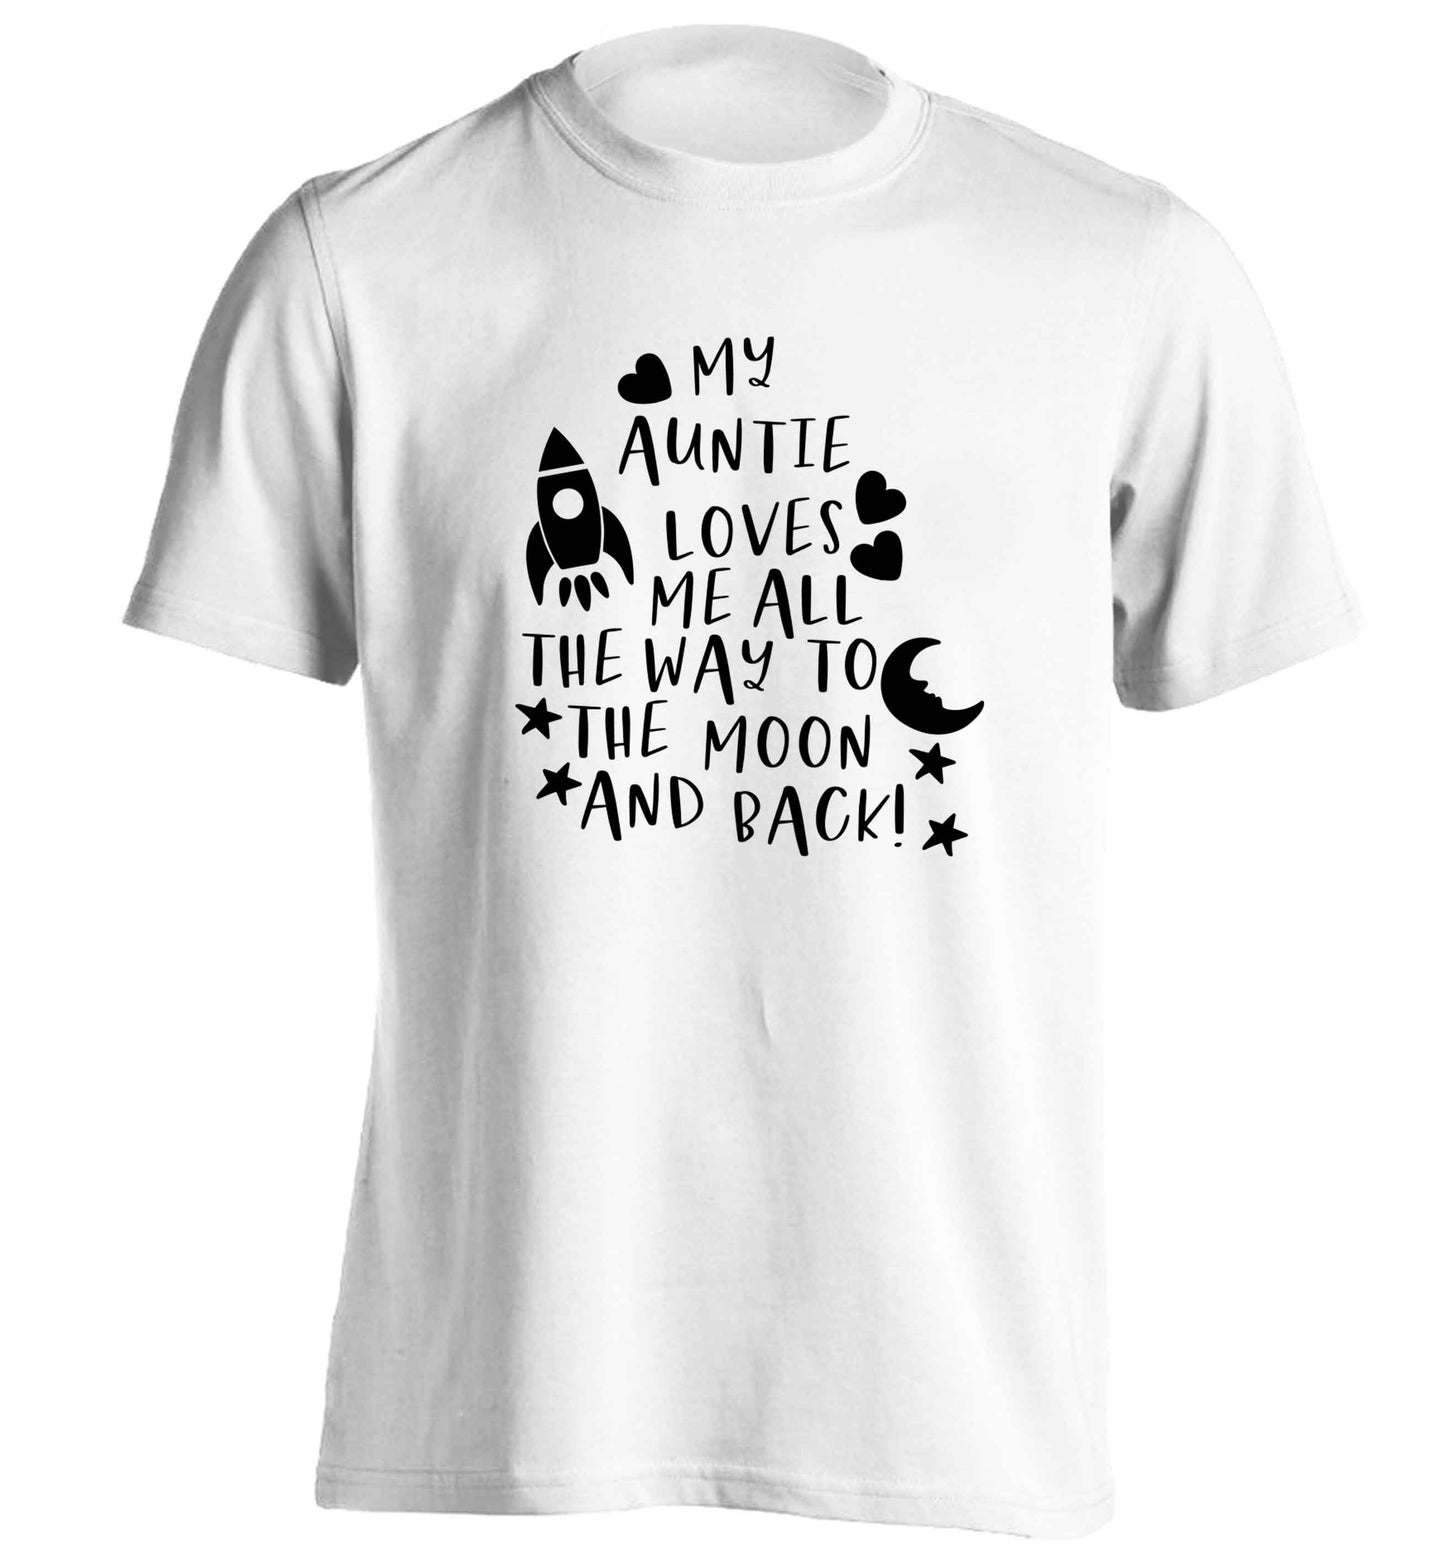 My auntie loves me all the way to the moon and back adults unisex white Tshirt 2XL